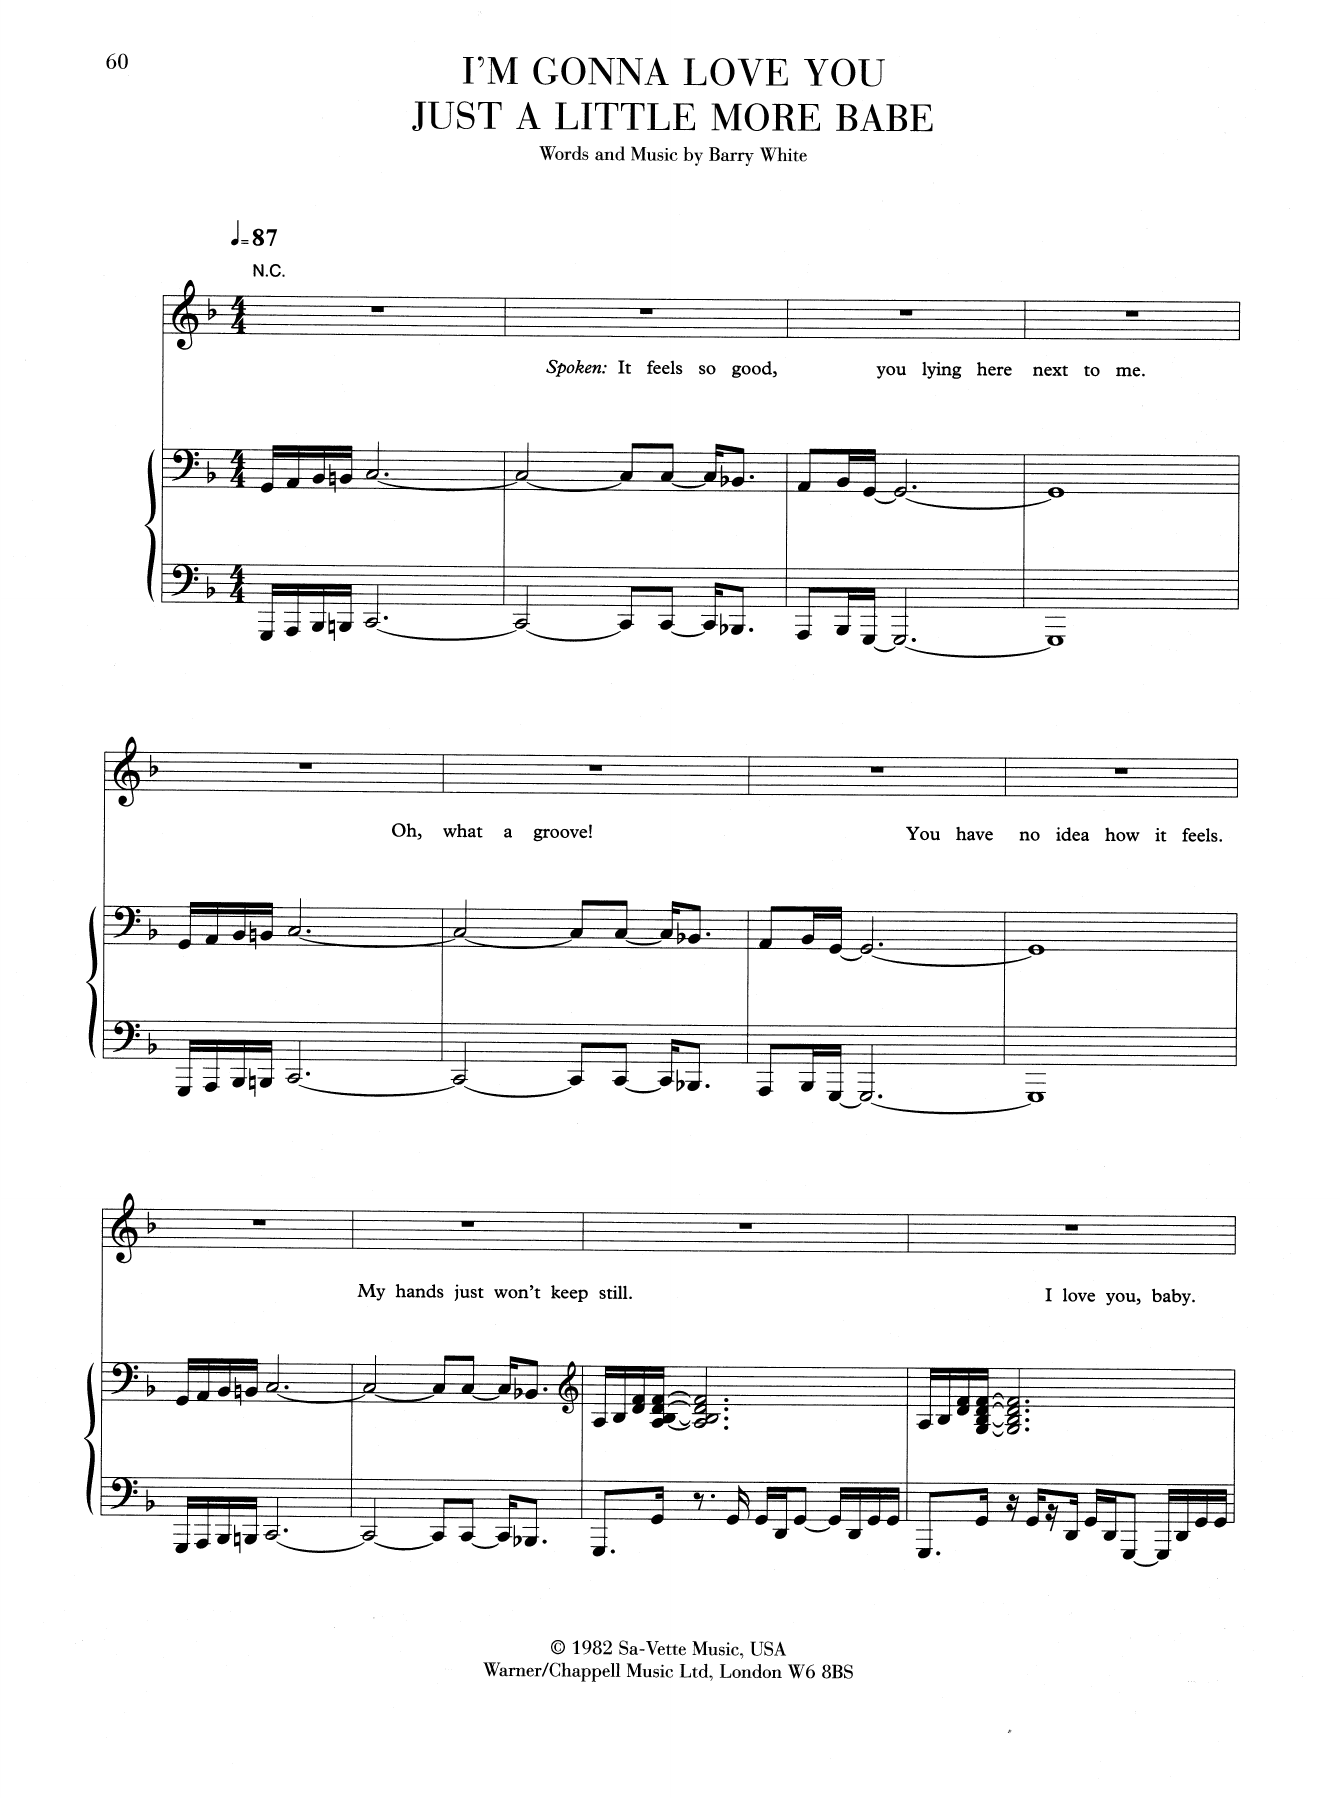 Download Barry White I'm Gonna Love You Just A Little Bit Mo Sheet Music